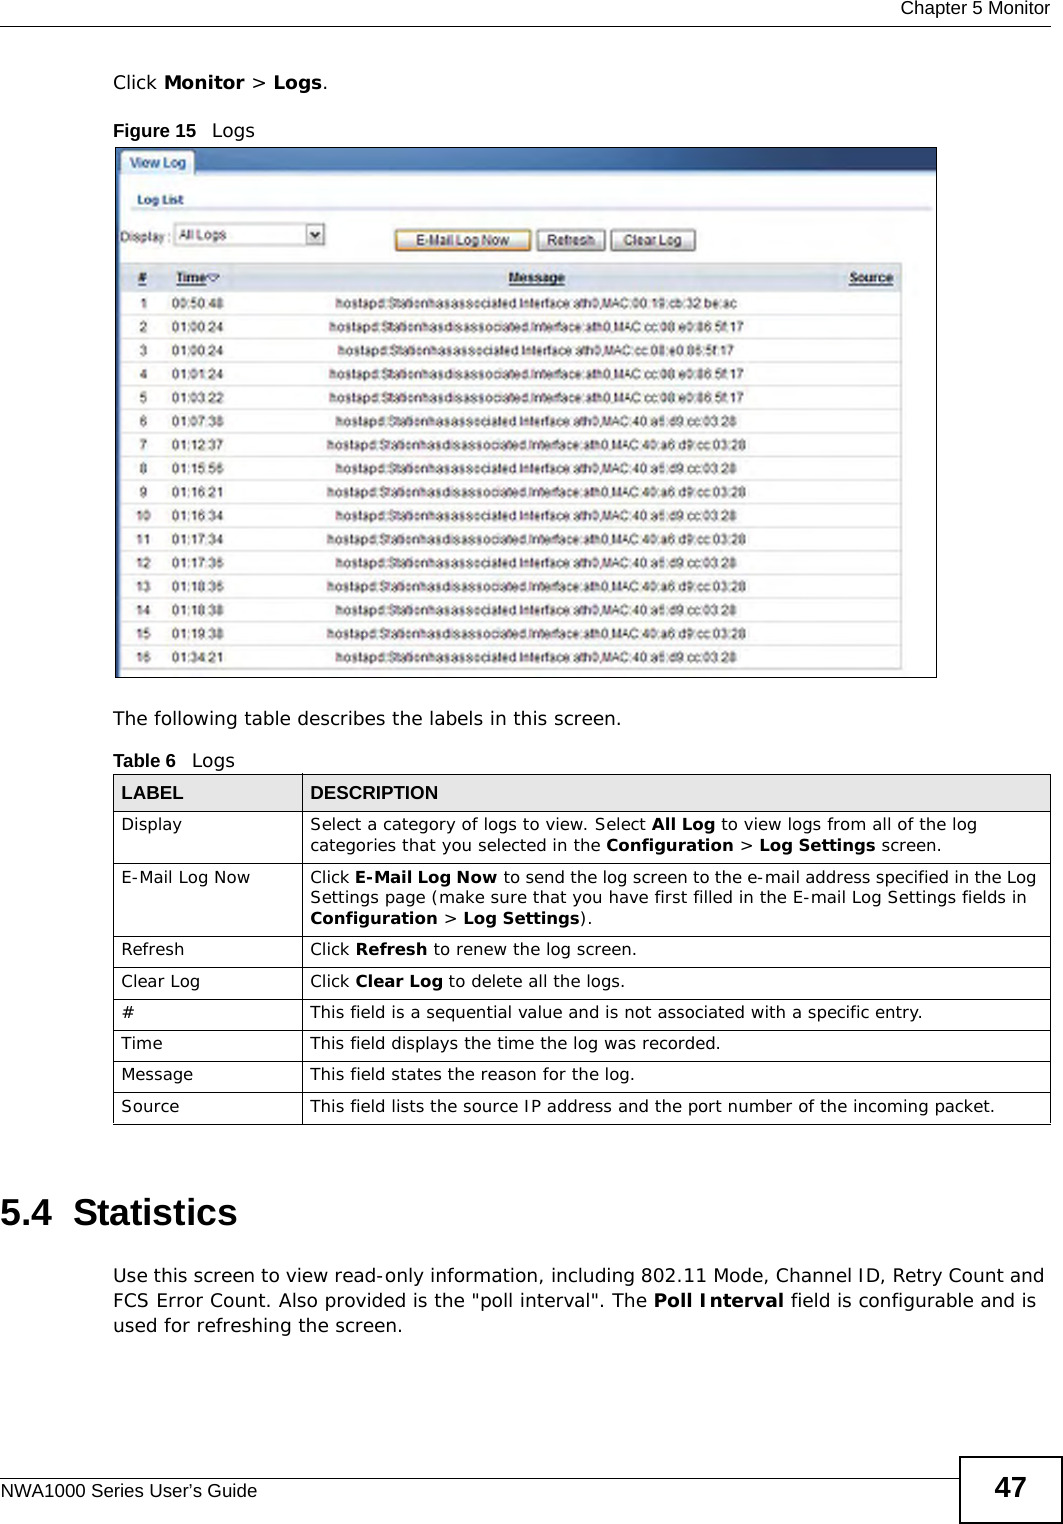  Chapter 5 MonitorNWA1000 Series User’s Guide 47Click Monitor &gt; Logs.Figure 15   Logs The following table describes the labels in this screen. 5.4  StatisticsUse this screen to view read-only information, including 802.11 Mode, Channel ID, Retry Count and FCS Error Count. Also provided is the &quot;poll interval&quot;. The Poll Interval field is configurable and is used for refreshing the screen.Table 6   LogsLABEL DESCRIPTIONDisplay  Select a category of logs to view. Select All Log to view logs from all of the log categories that you selected in the Configuration &gt; Log Settings screen.E-Mail Log Now Click E-Mail Log Now to send the log screen to the e-mail address specified in the Log Settings page (make sure that you have first filled in the E-mail Log Settings fields in Configuration &gt; Log Settings).Refresh Click Refresh to renew the log screen. Clear Log Click Clear Log to delete all the logs. #This field is a sequential value and is not associated with a specific entry.Time  This field displays the time the log was recorded. Message This field states the reason for the log.Source This field lists the source IP address and the port number of the incoming packet.